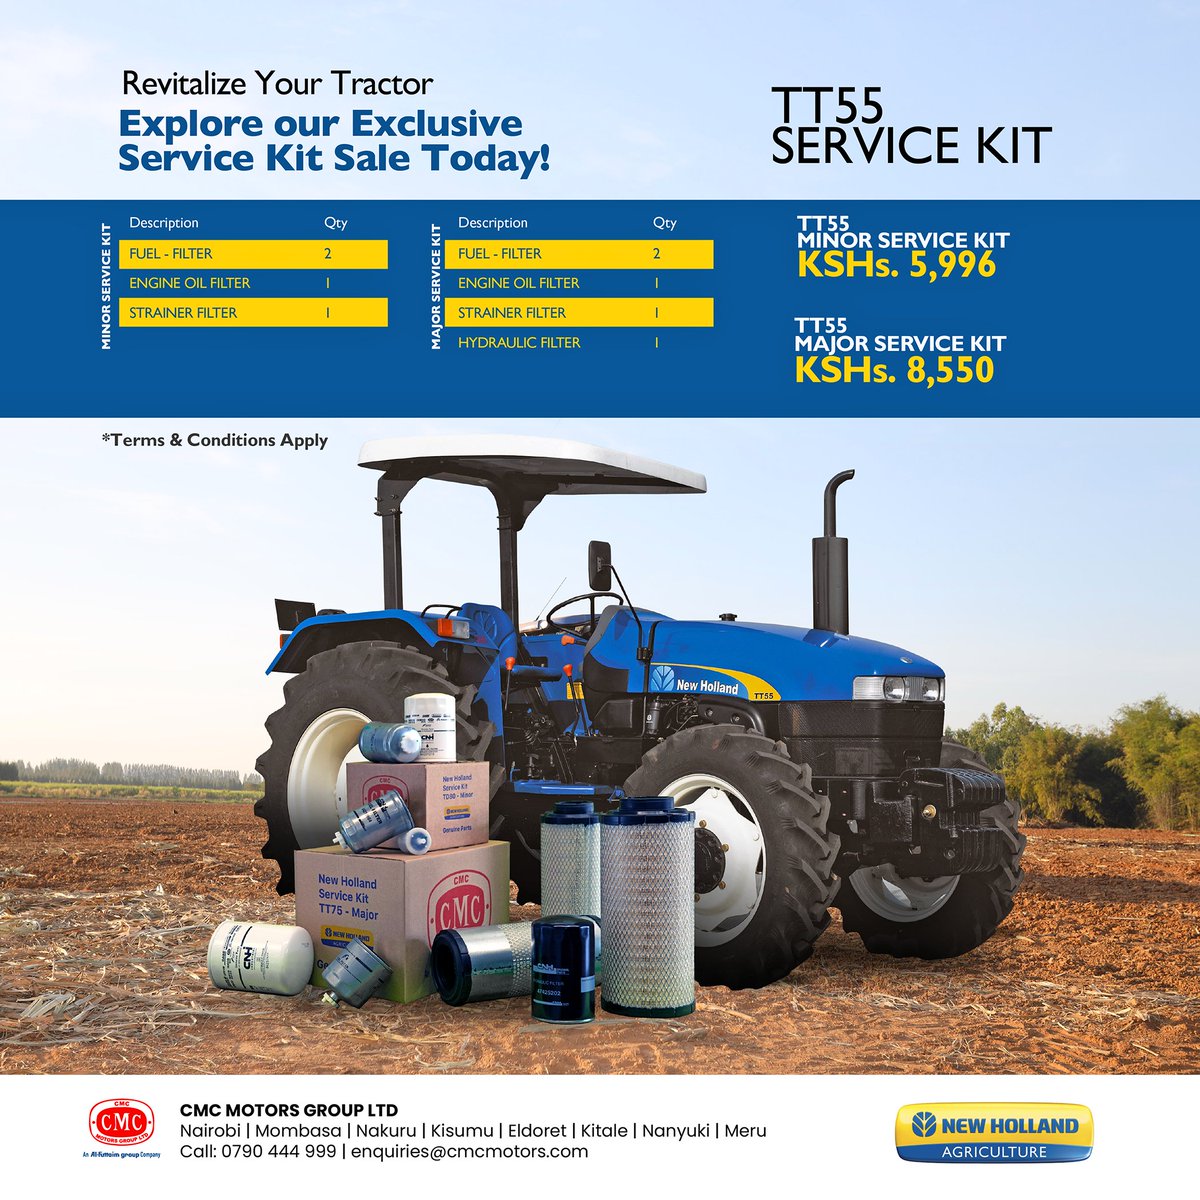 Maintain your New Holland TT55 by fitting it with genuine spare parts at affordable prices.

Get a minor or major service kit for your tractor today.

Call 0790444999 or write to enquiries@cmcmotors.com for more details.

#CMCMotors #NewHolland #AgricultureKenya